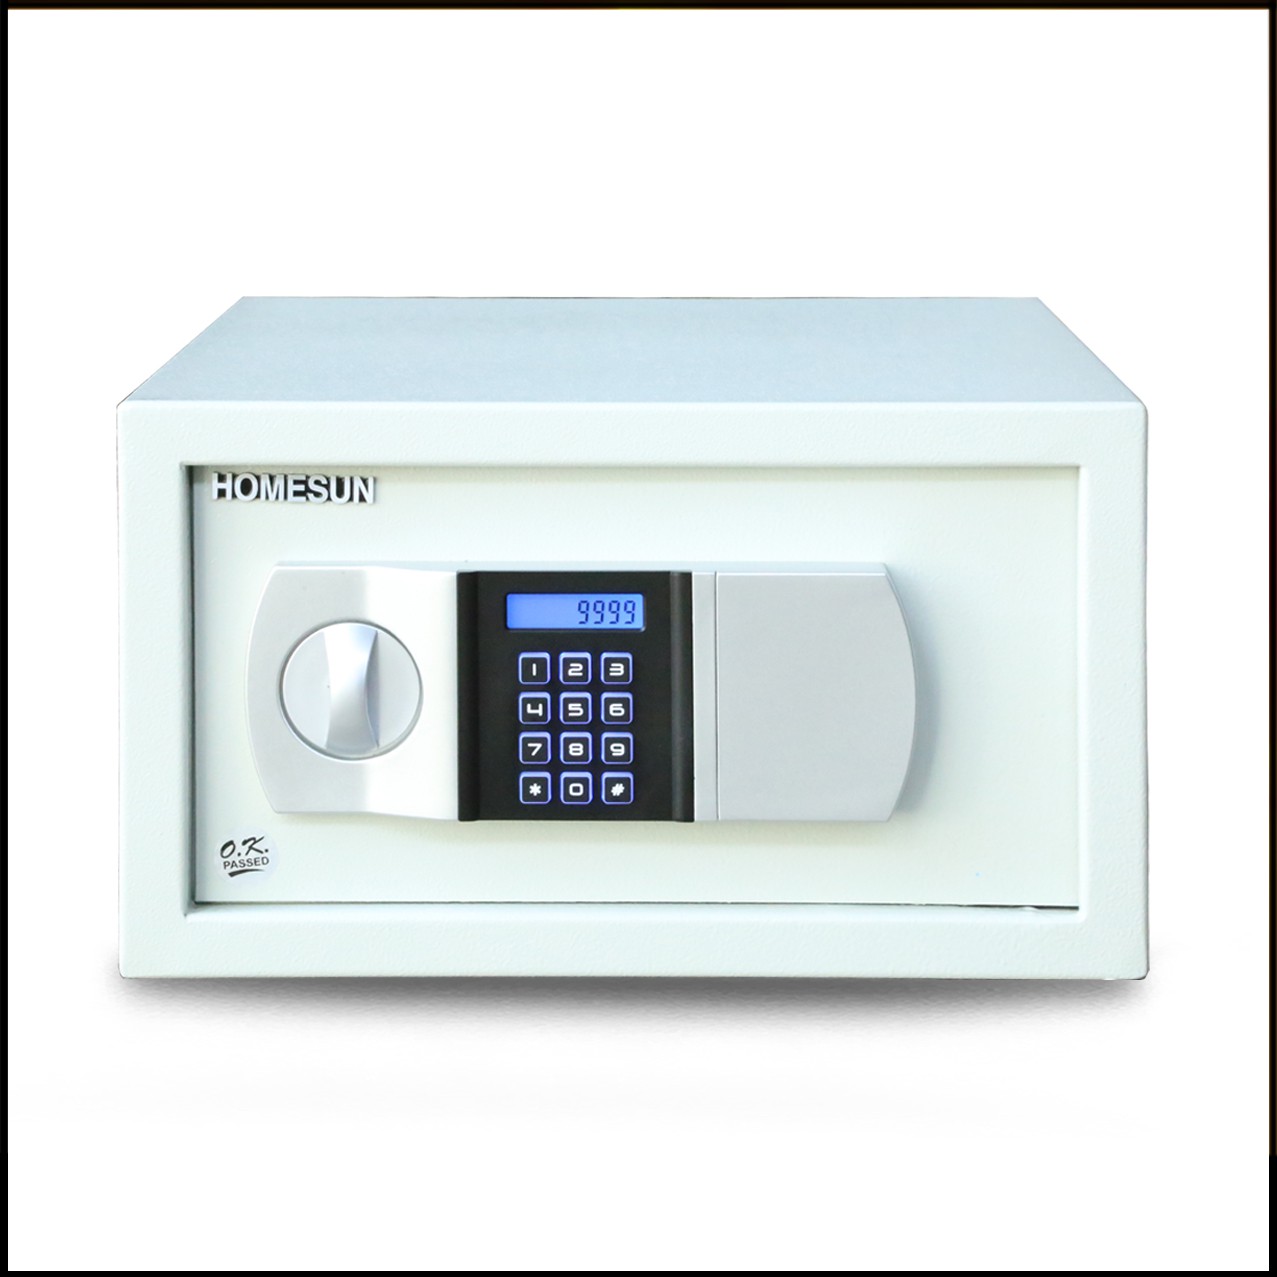 Hotel Room Safe Wholesale Suppliers